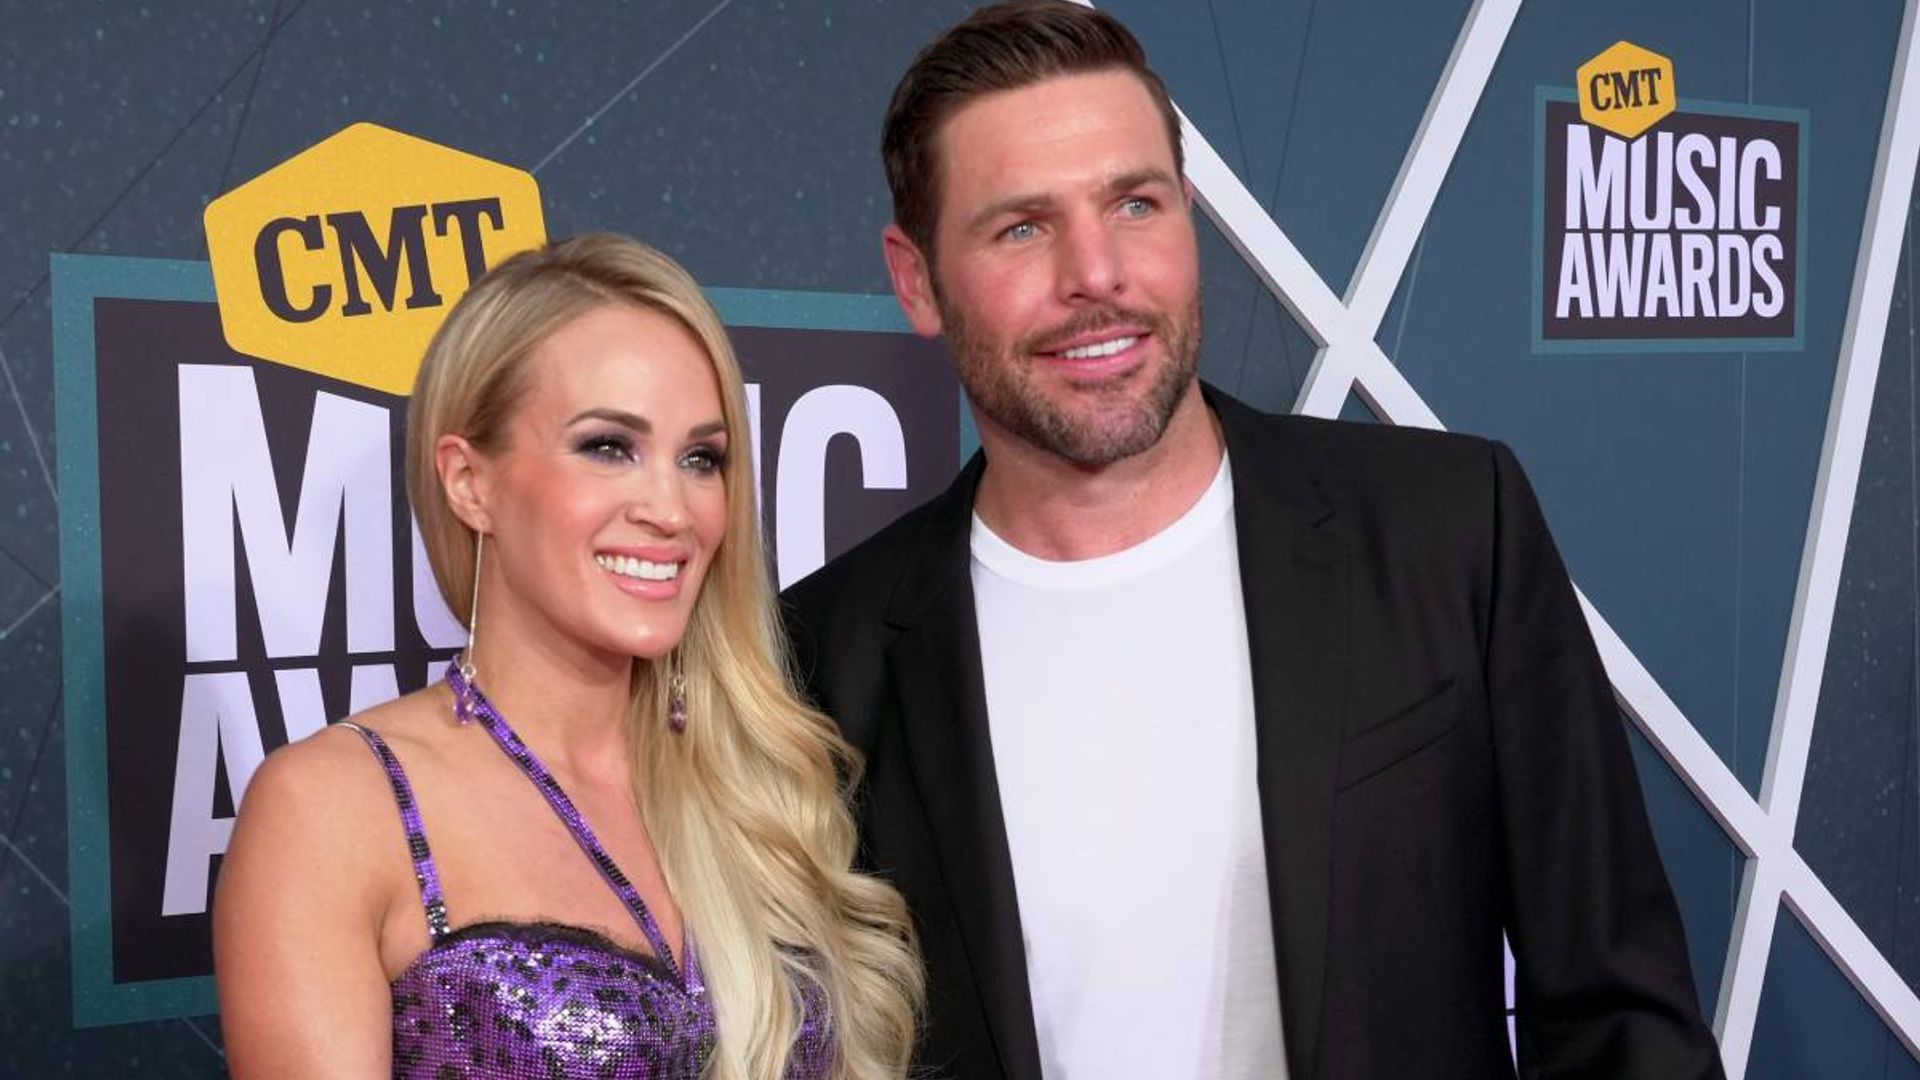 carrie-underwood-husband-mike-fisher-cmt-awards-performance-ghost-story